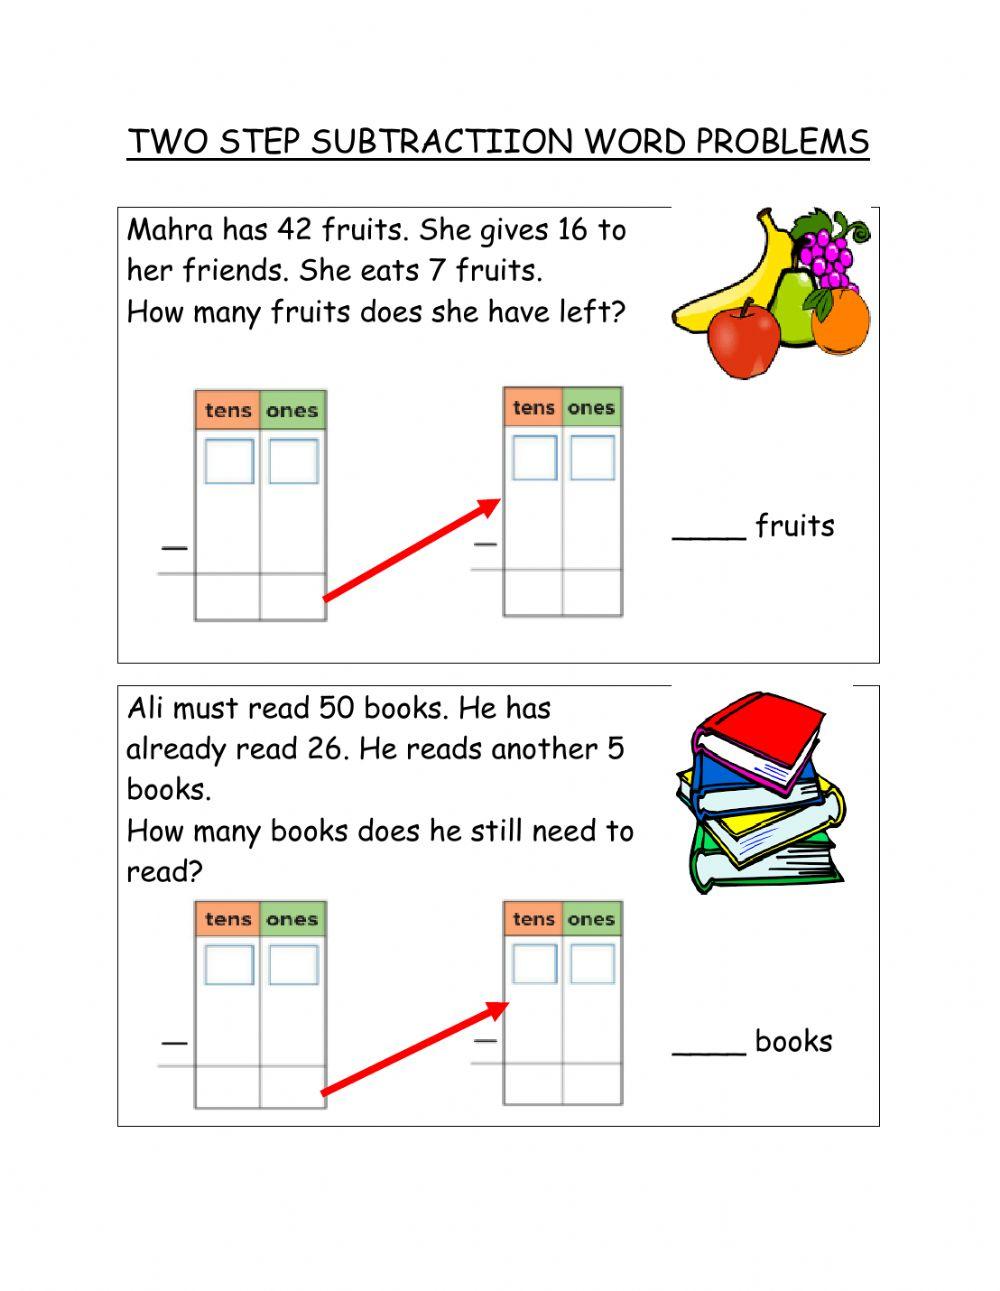 Two step subtraction word problems